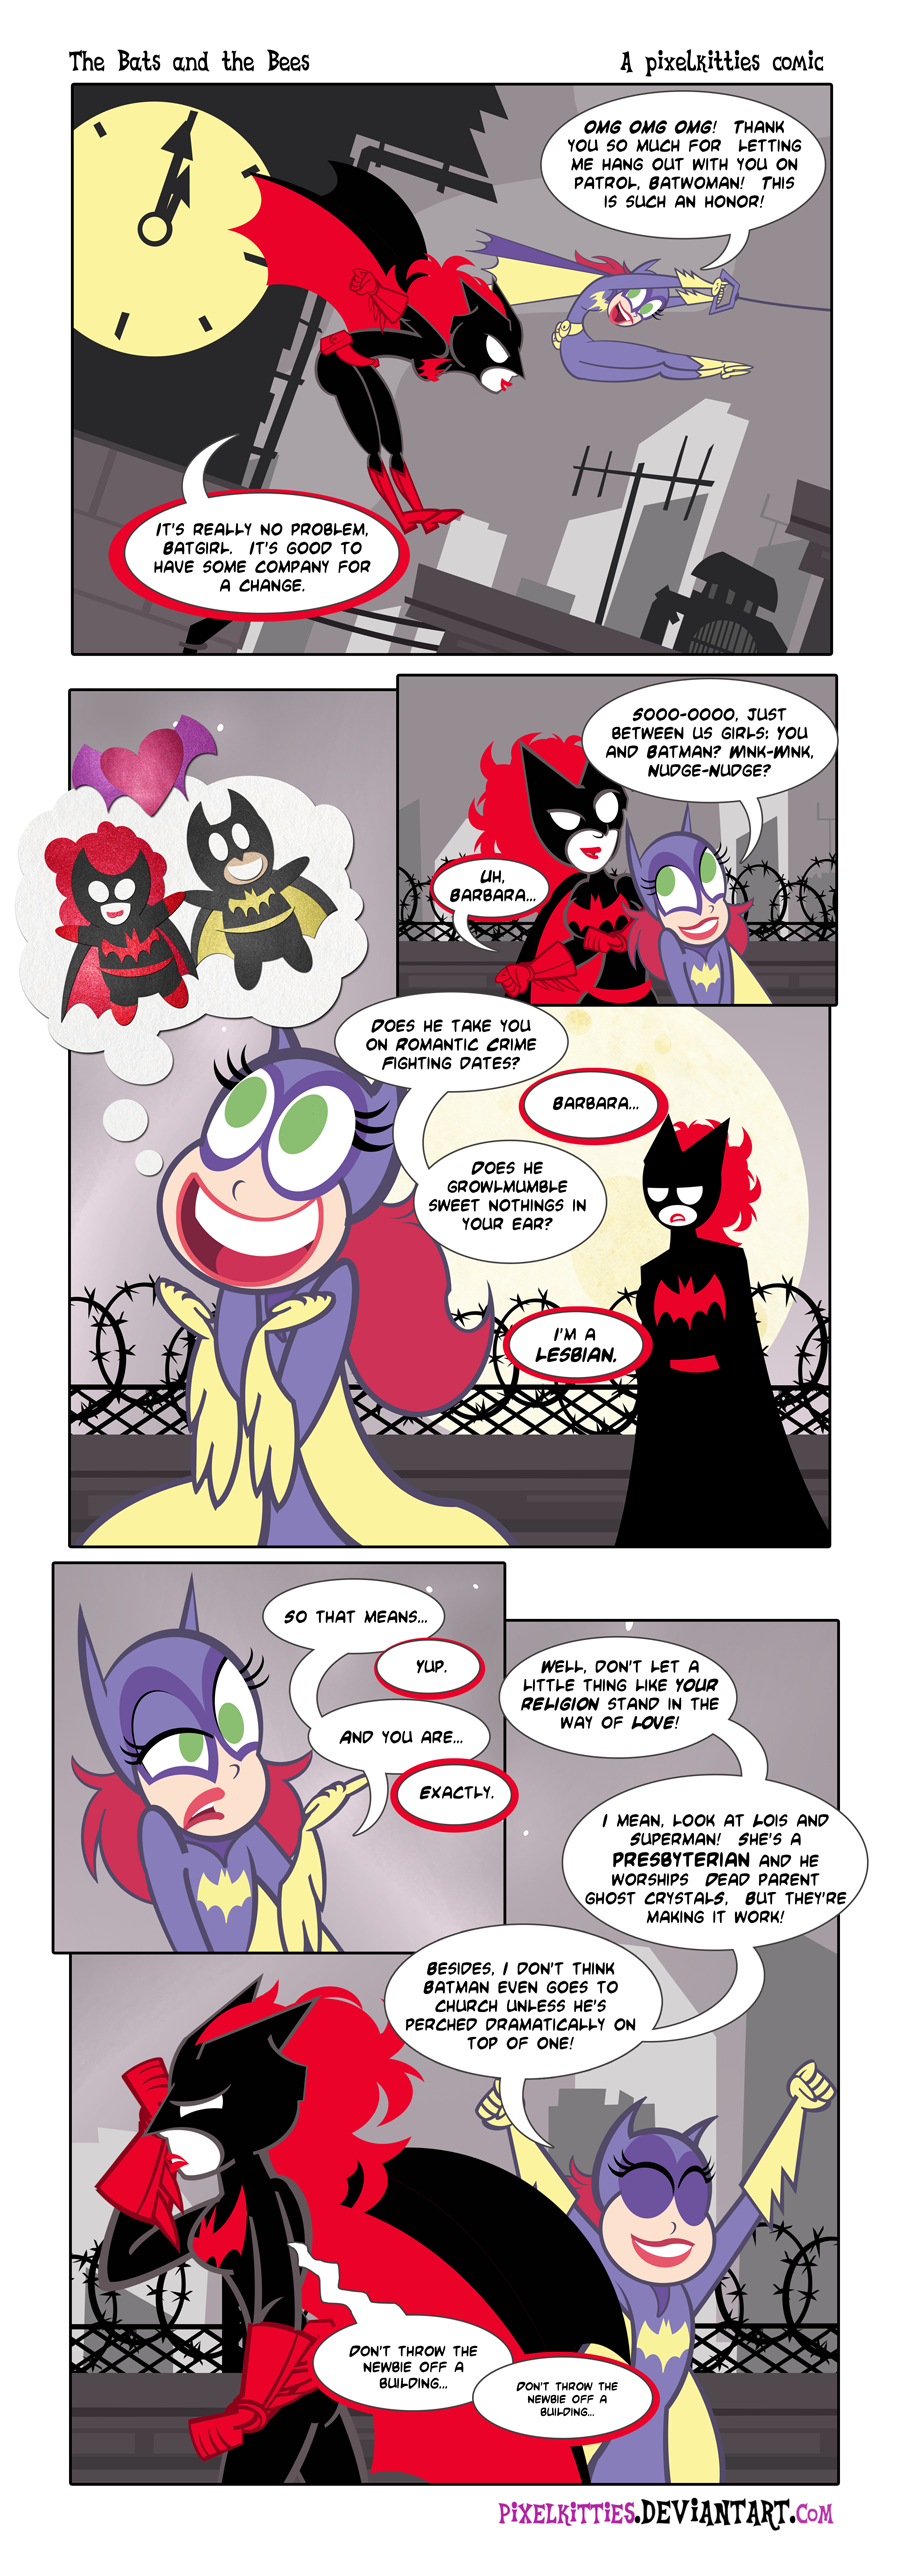 The Bats and the Bees